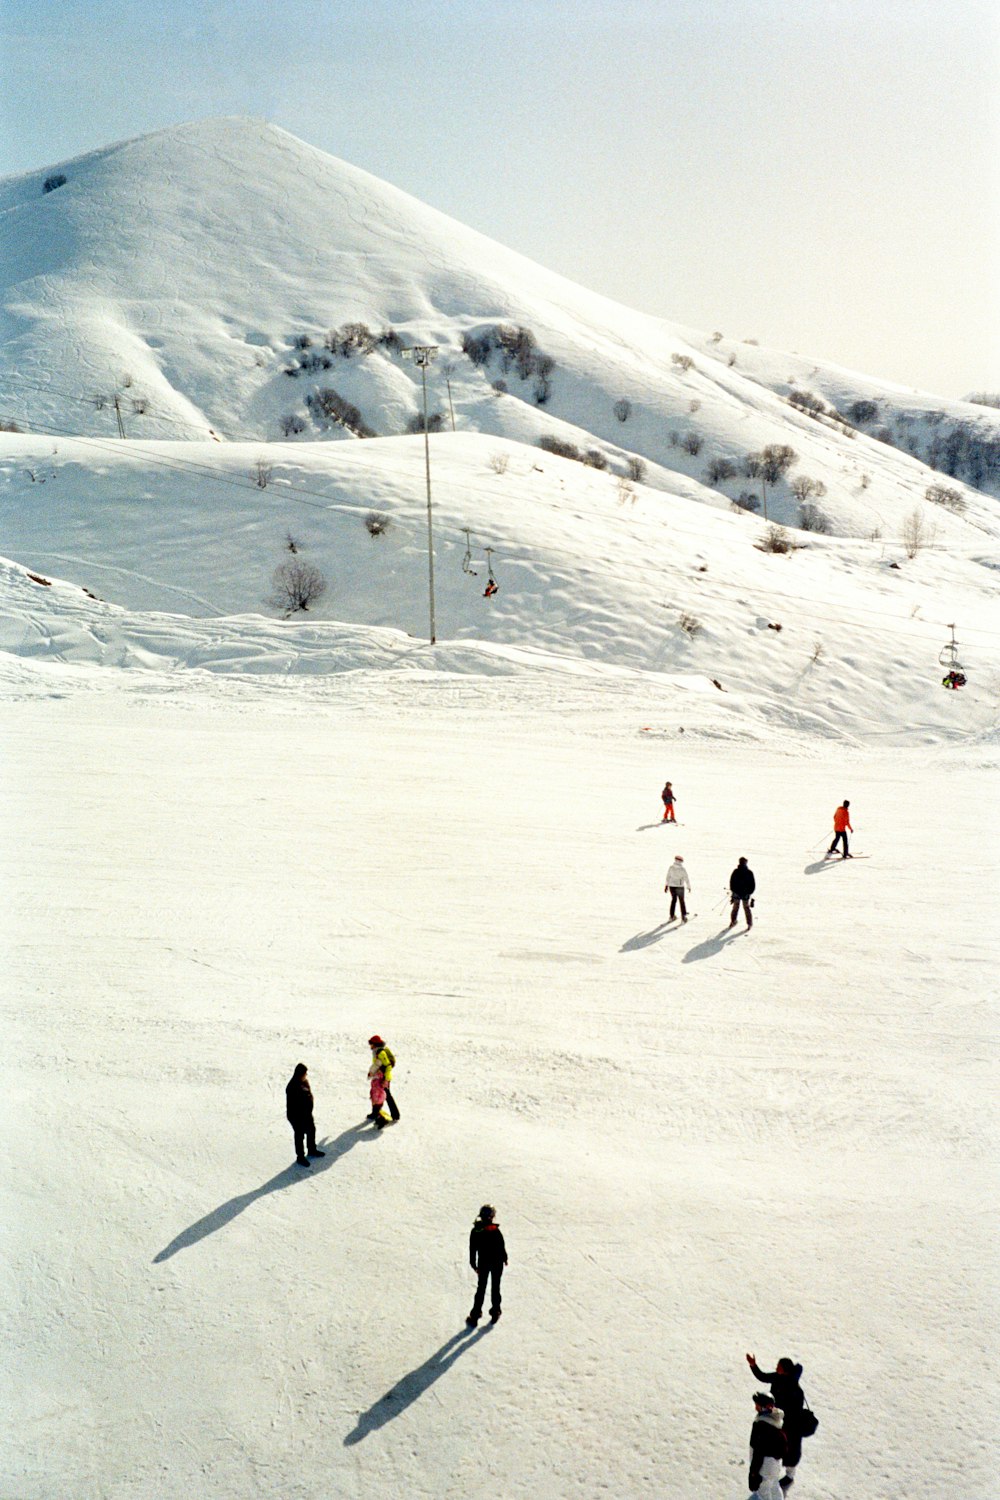 a group of people riding skis down a snow covered slope